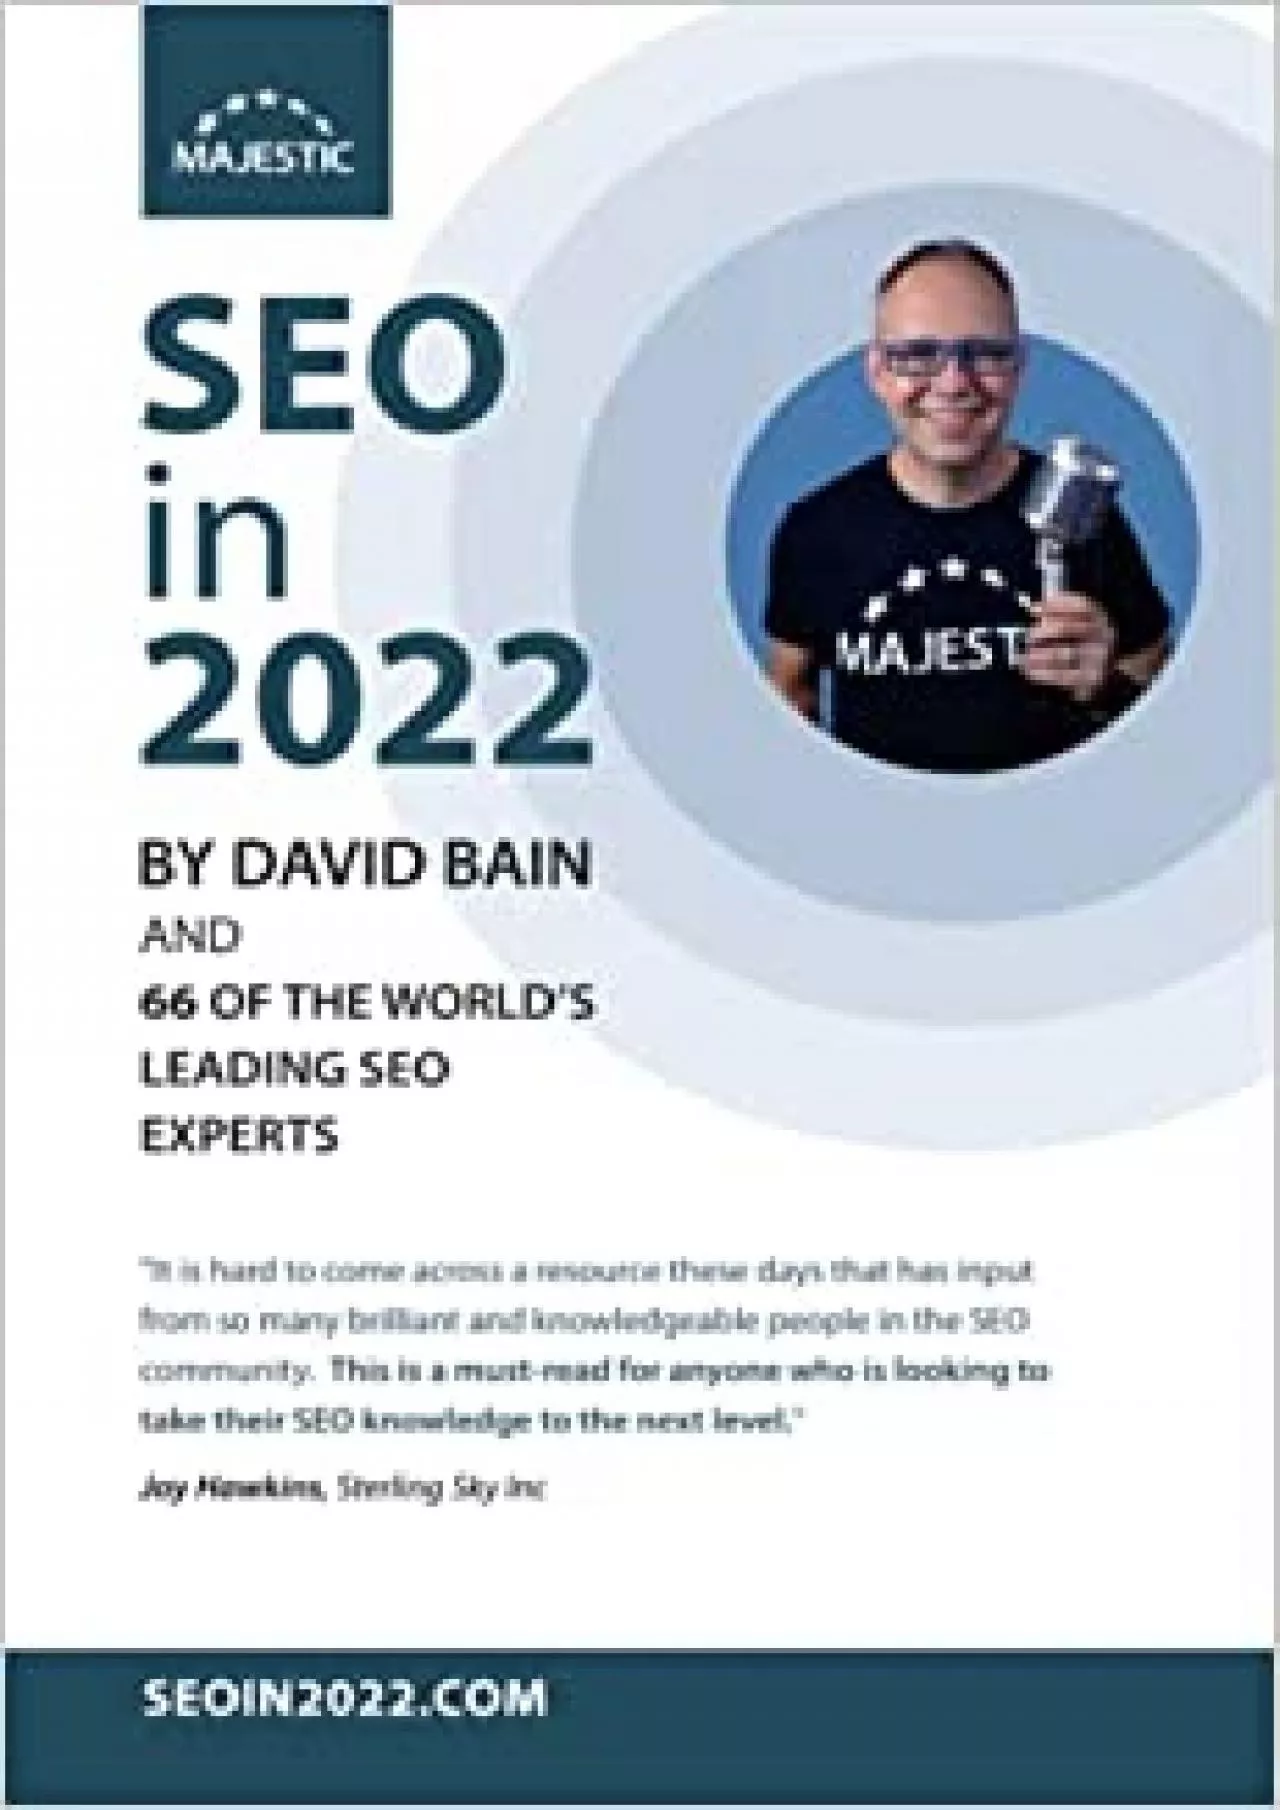 SEO in 2022 66 of the world’s leading SEOs share their number 1, actionable tip for